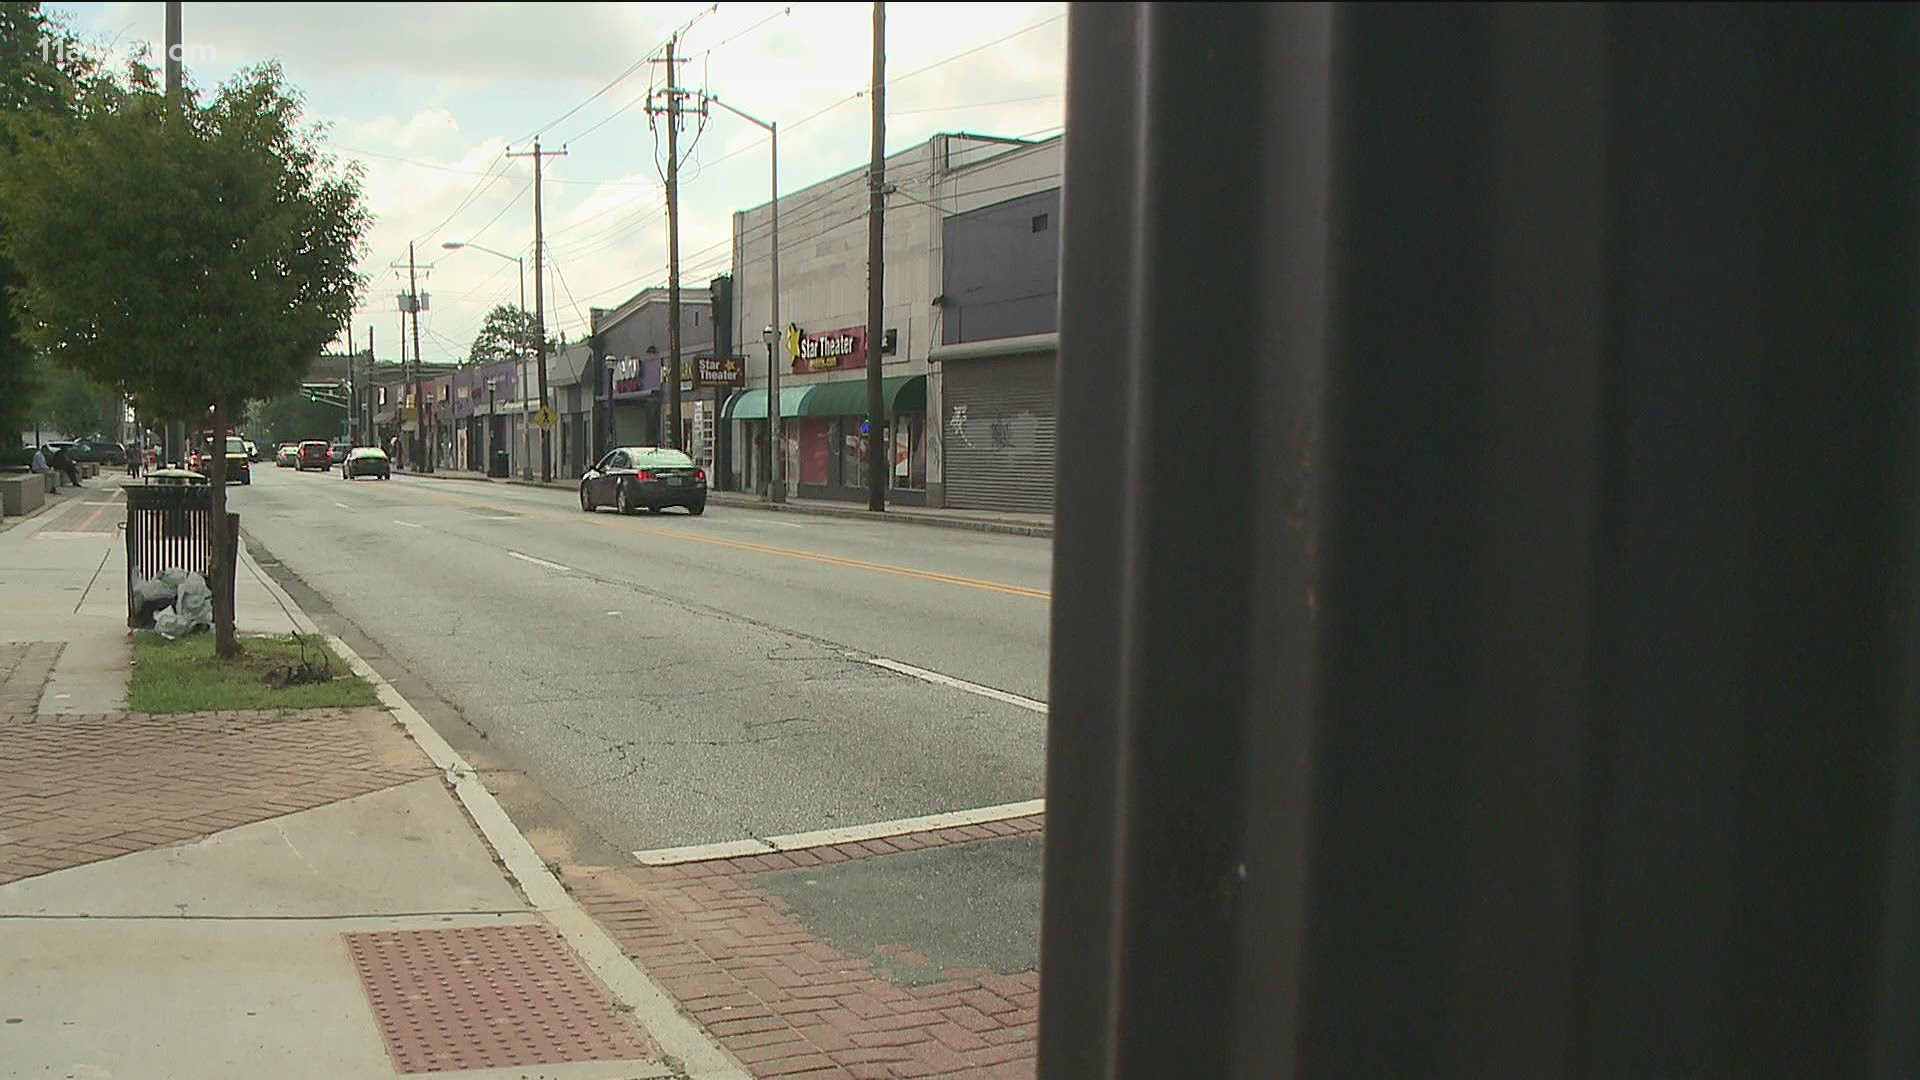 Minority-owned small businesses in Atlanta’s West End have been hit especially hard, but owners are working hard to come up with innovative ways to keep doors open.